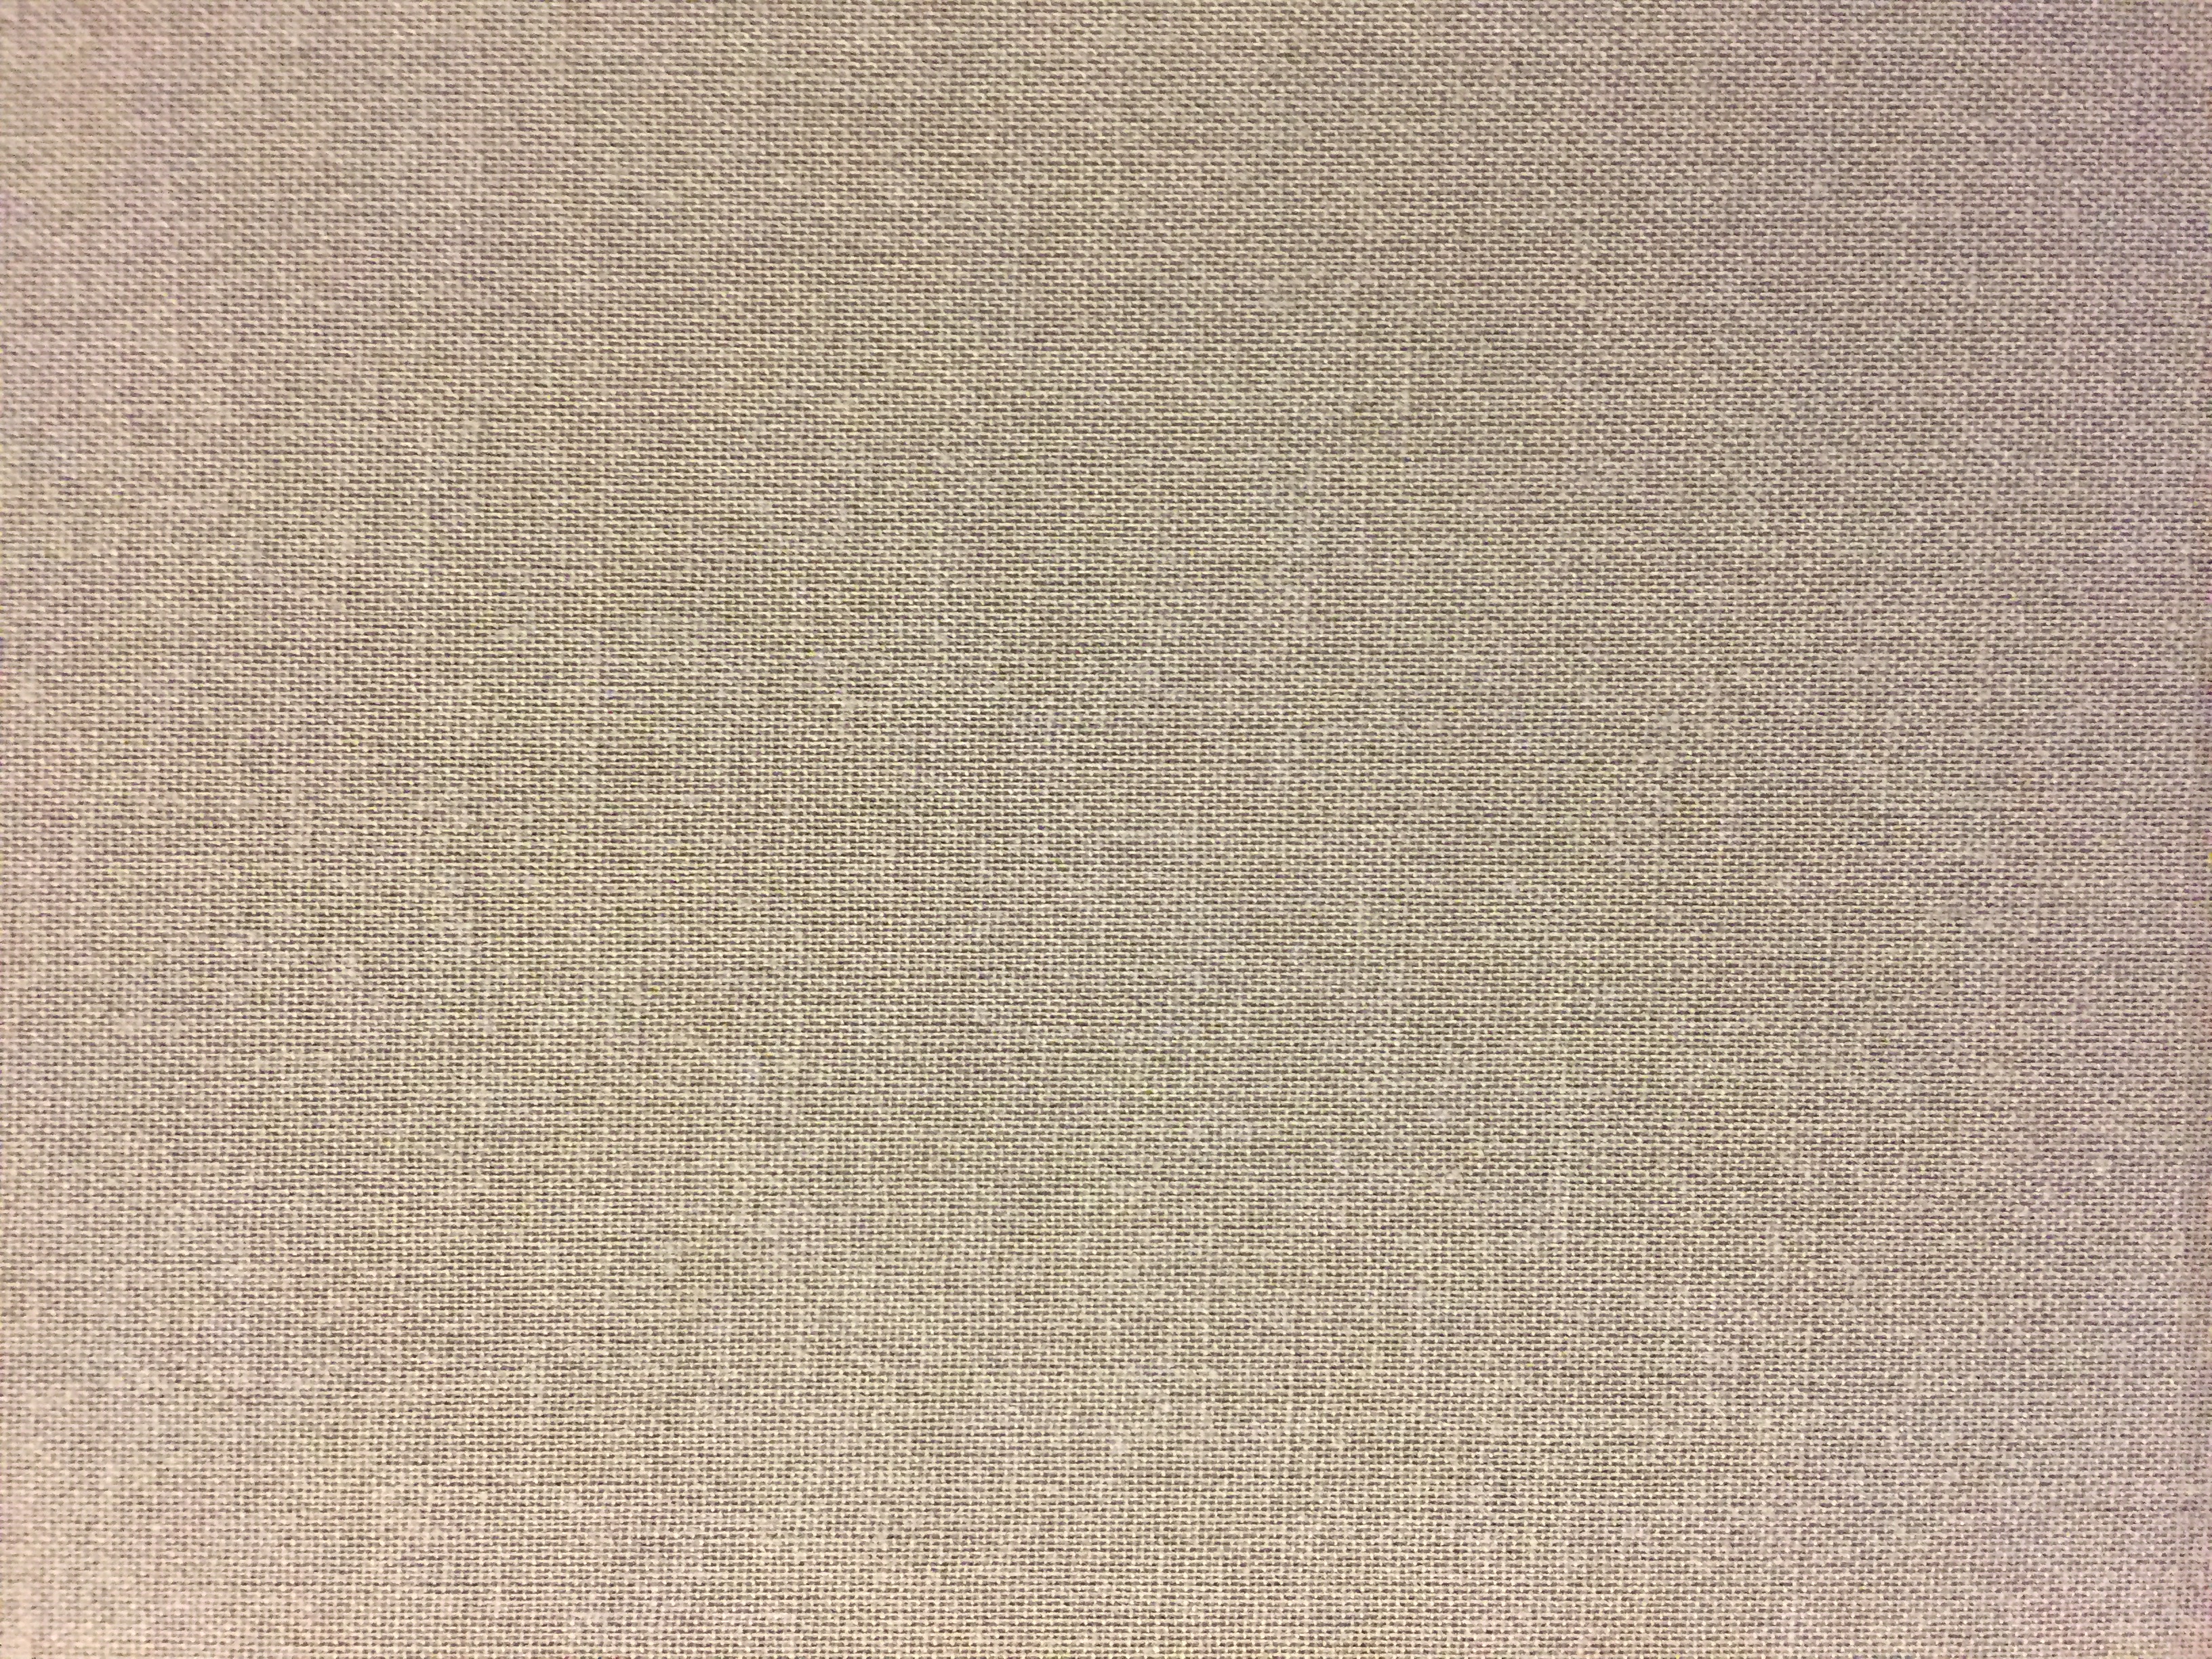 Thin light fabric from book cover | Textures